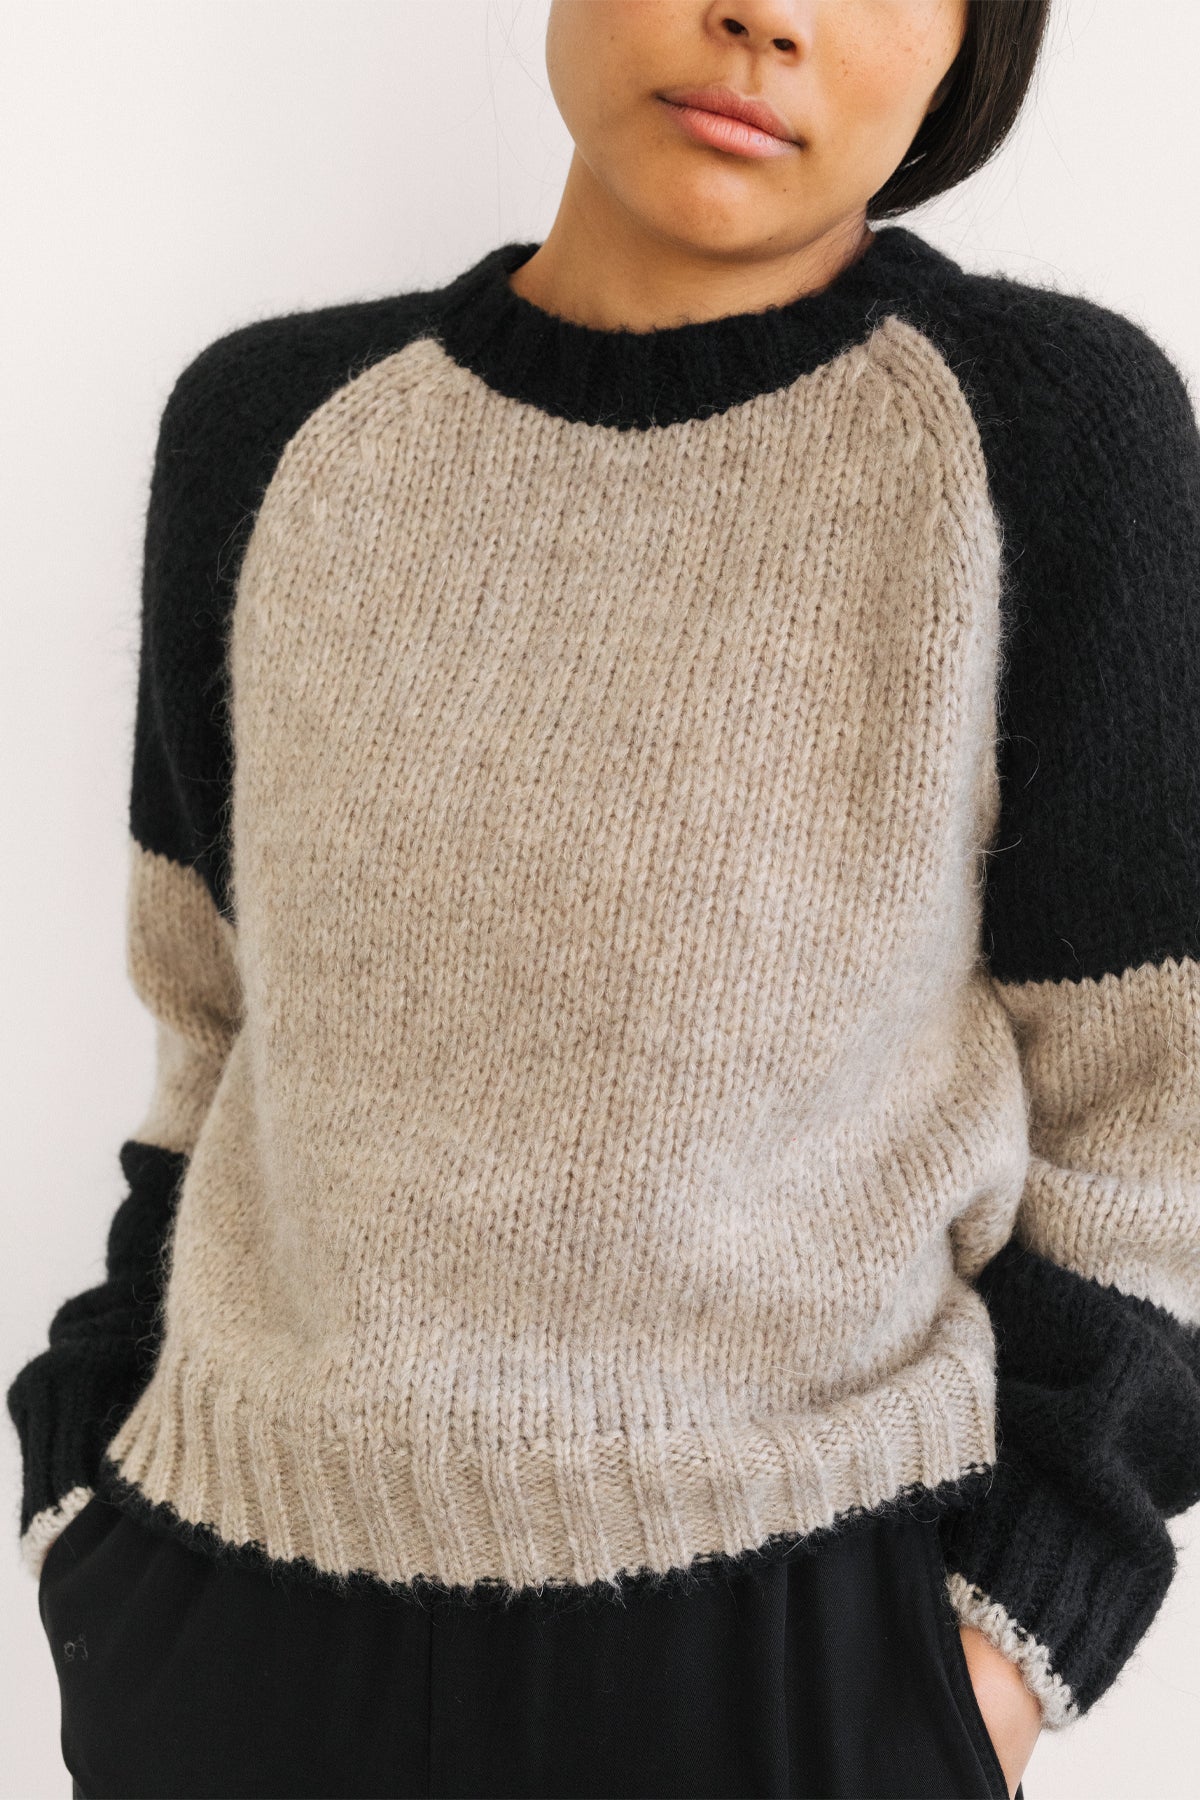 Knit for women made in europe